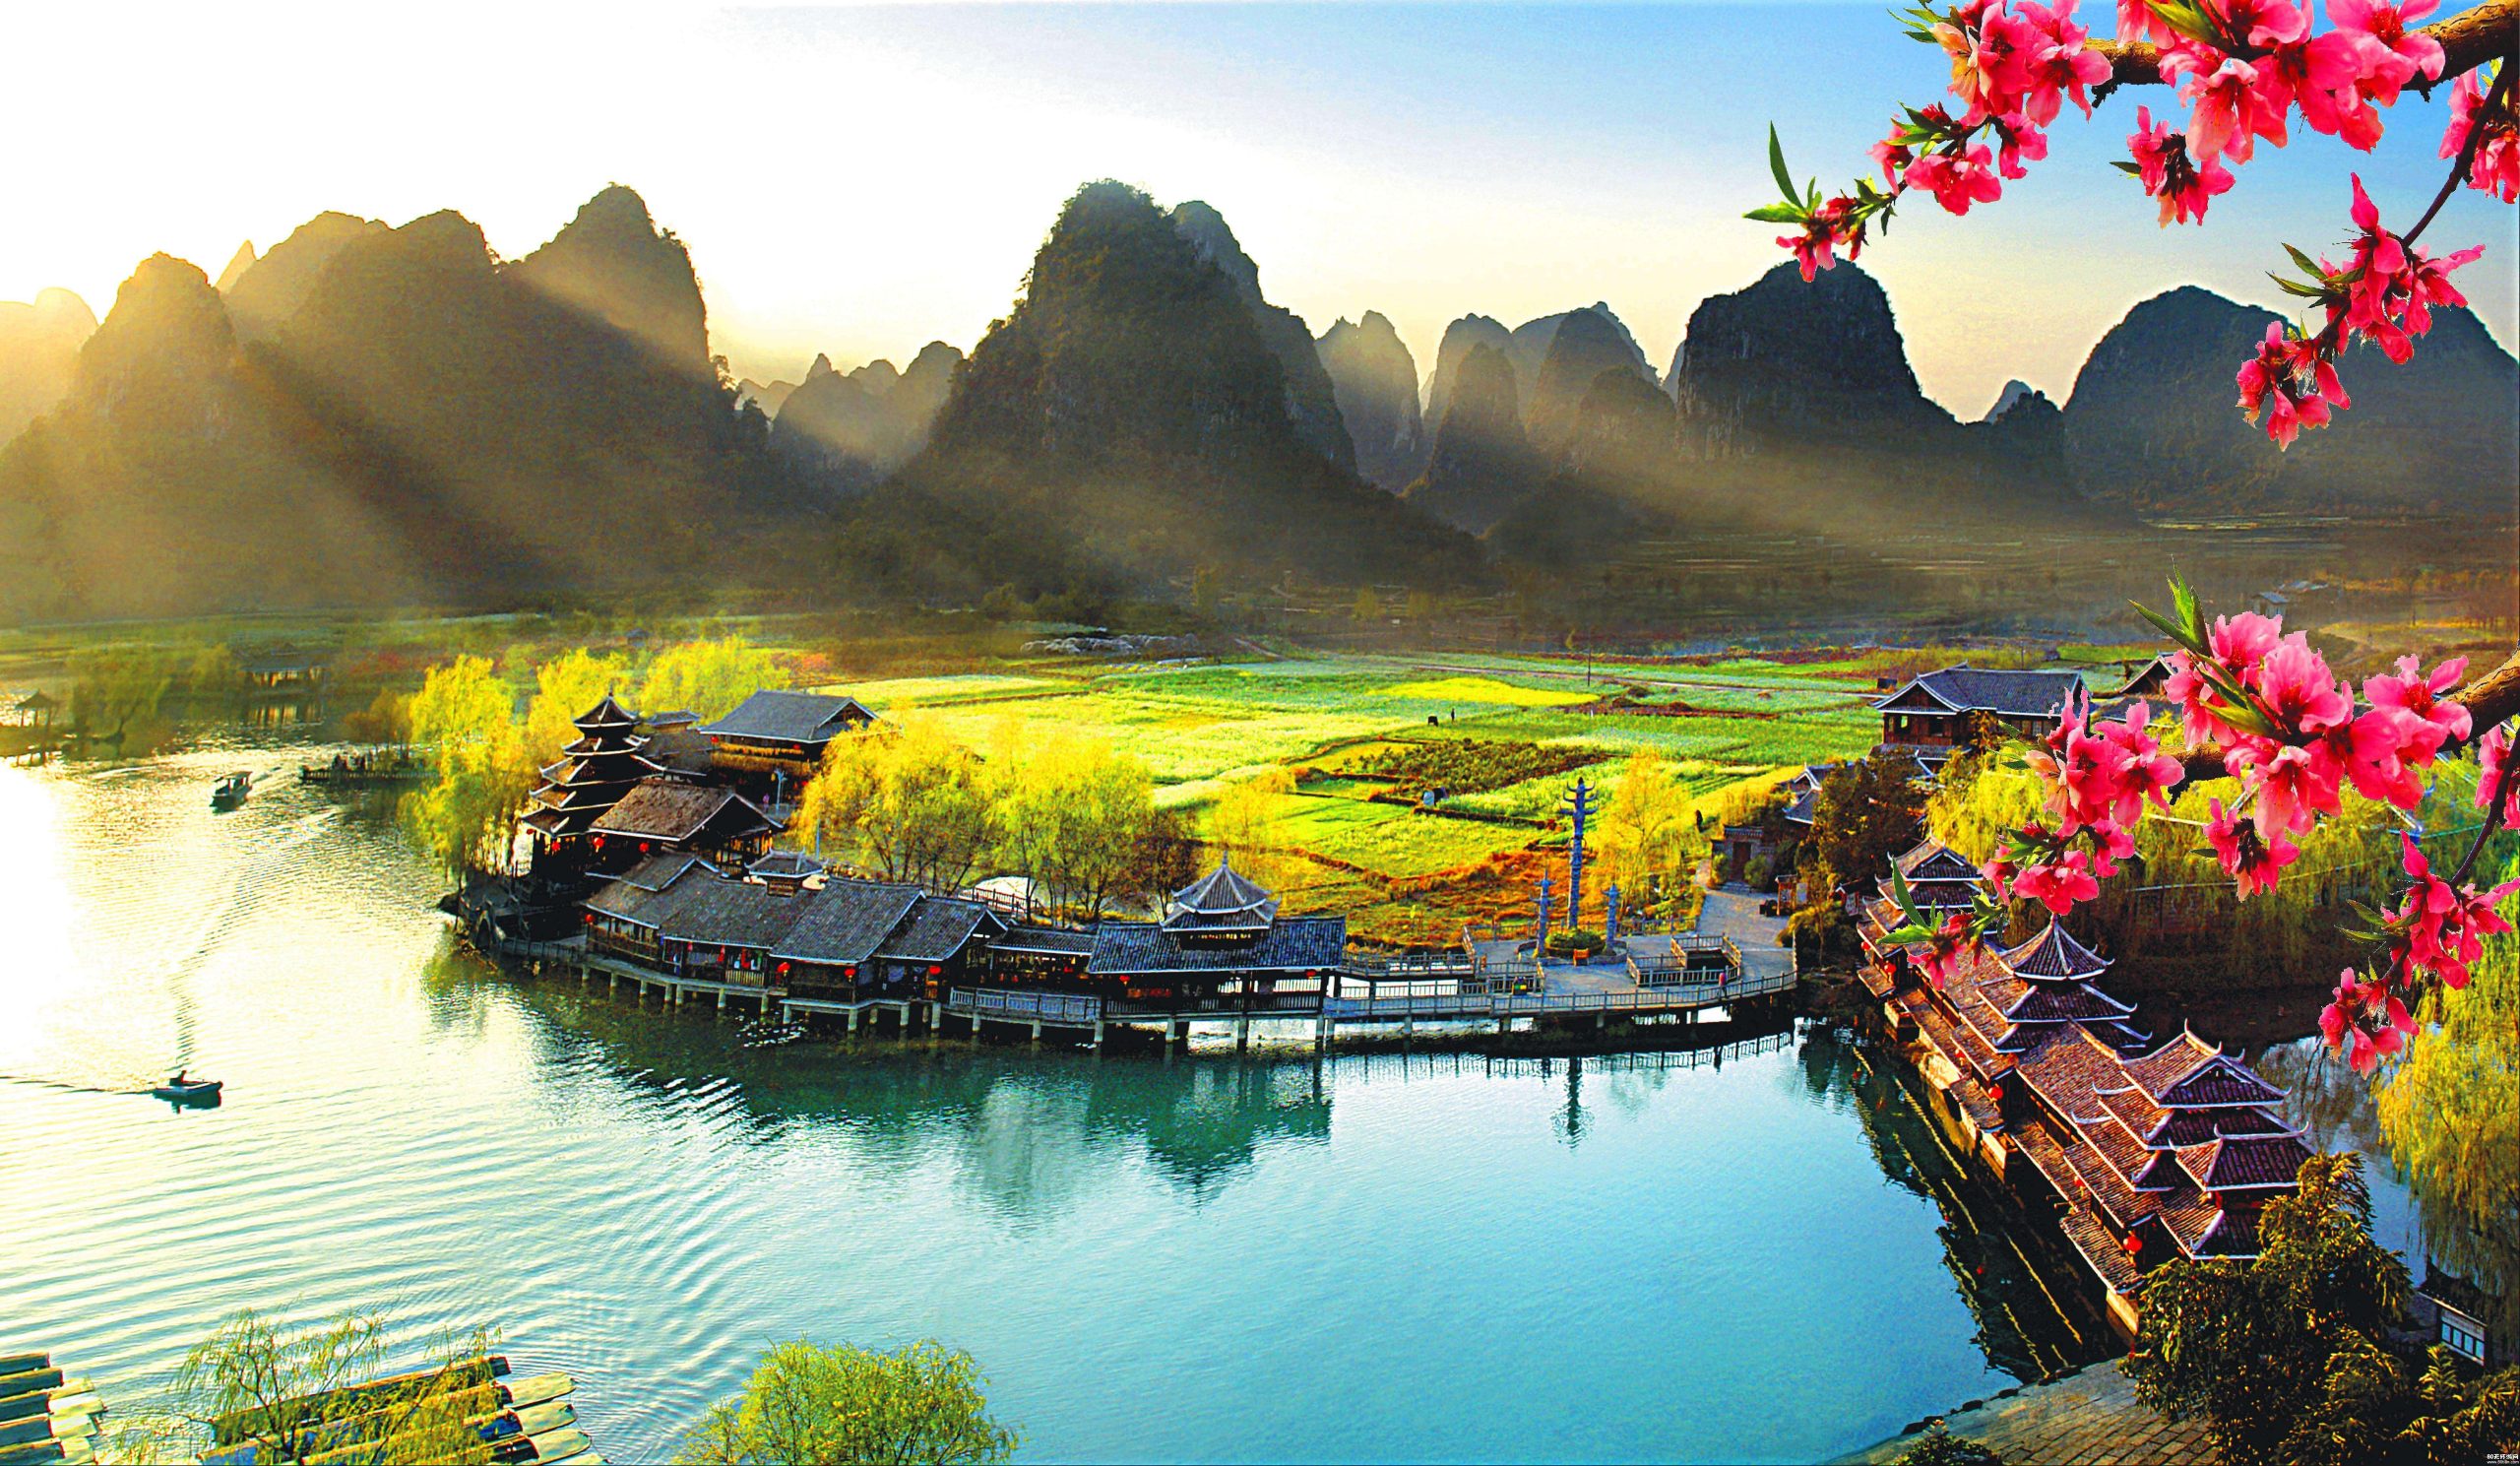 Crystal-clear waters of the Li River winding through karst mountains